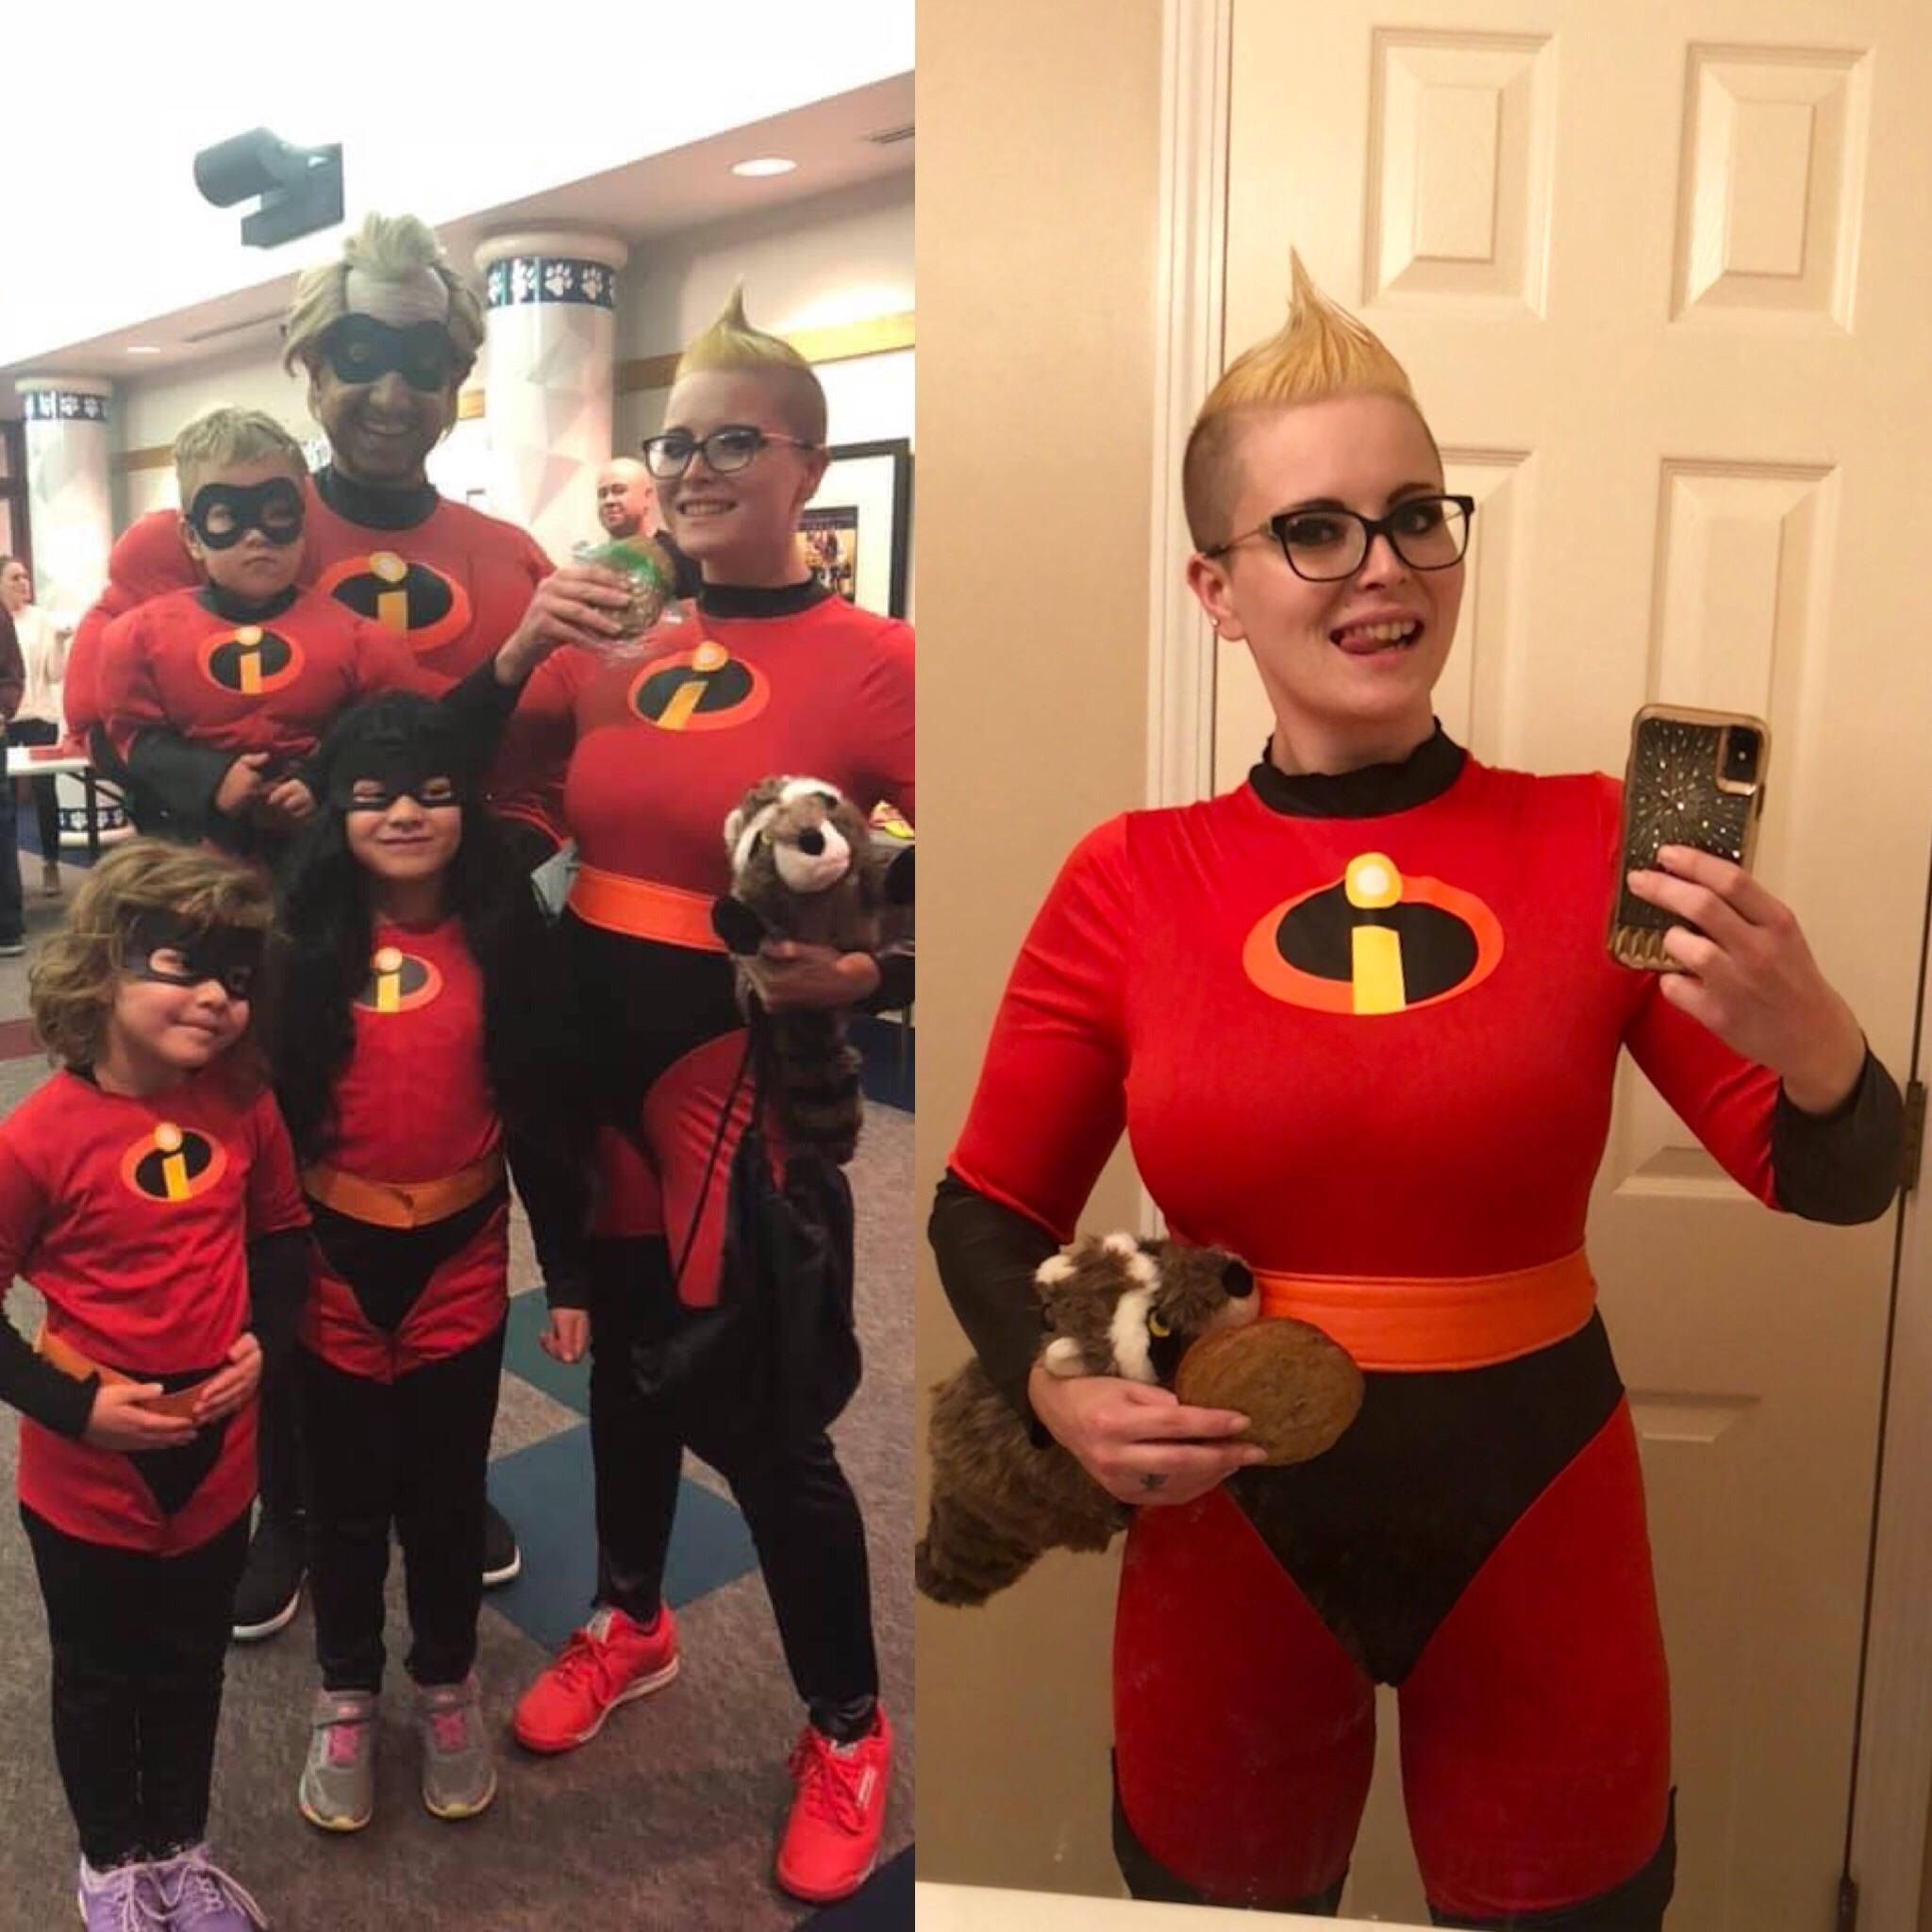 Kids called dibs on their favorite supers, so I embraced the roll of Baby Jack Jack the best I could.